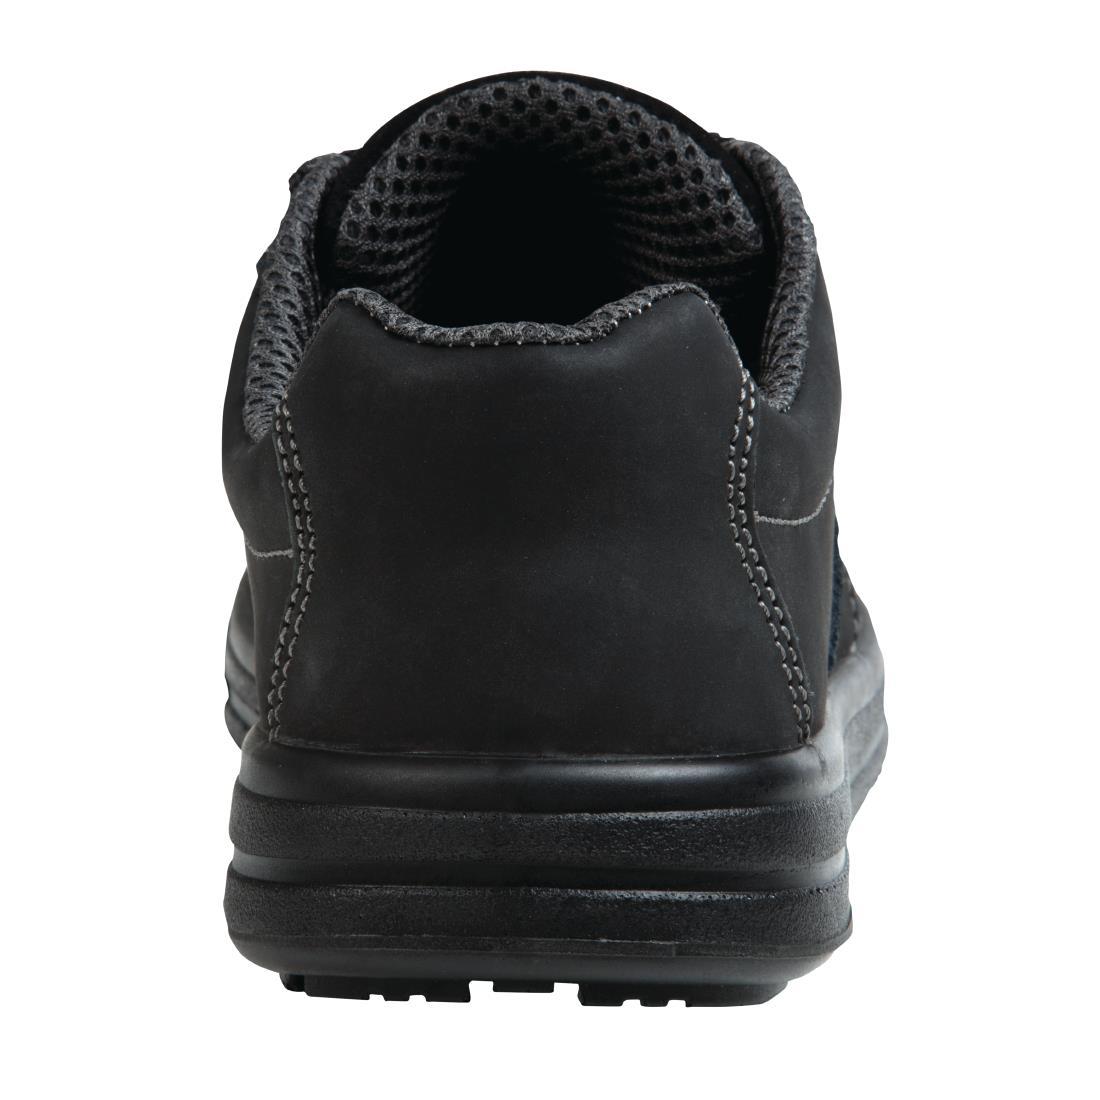 Slipbuster Safety Trainers Black 43 - BB420-43  - 4